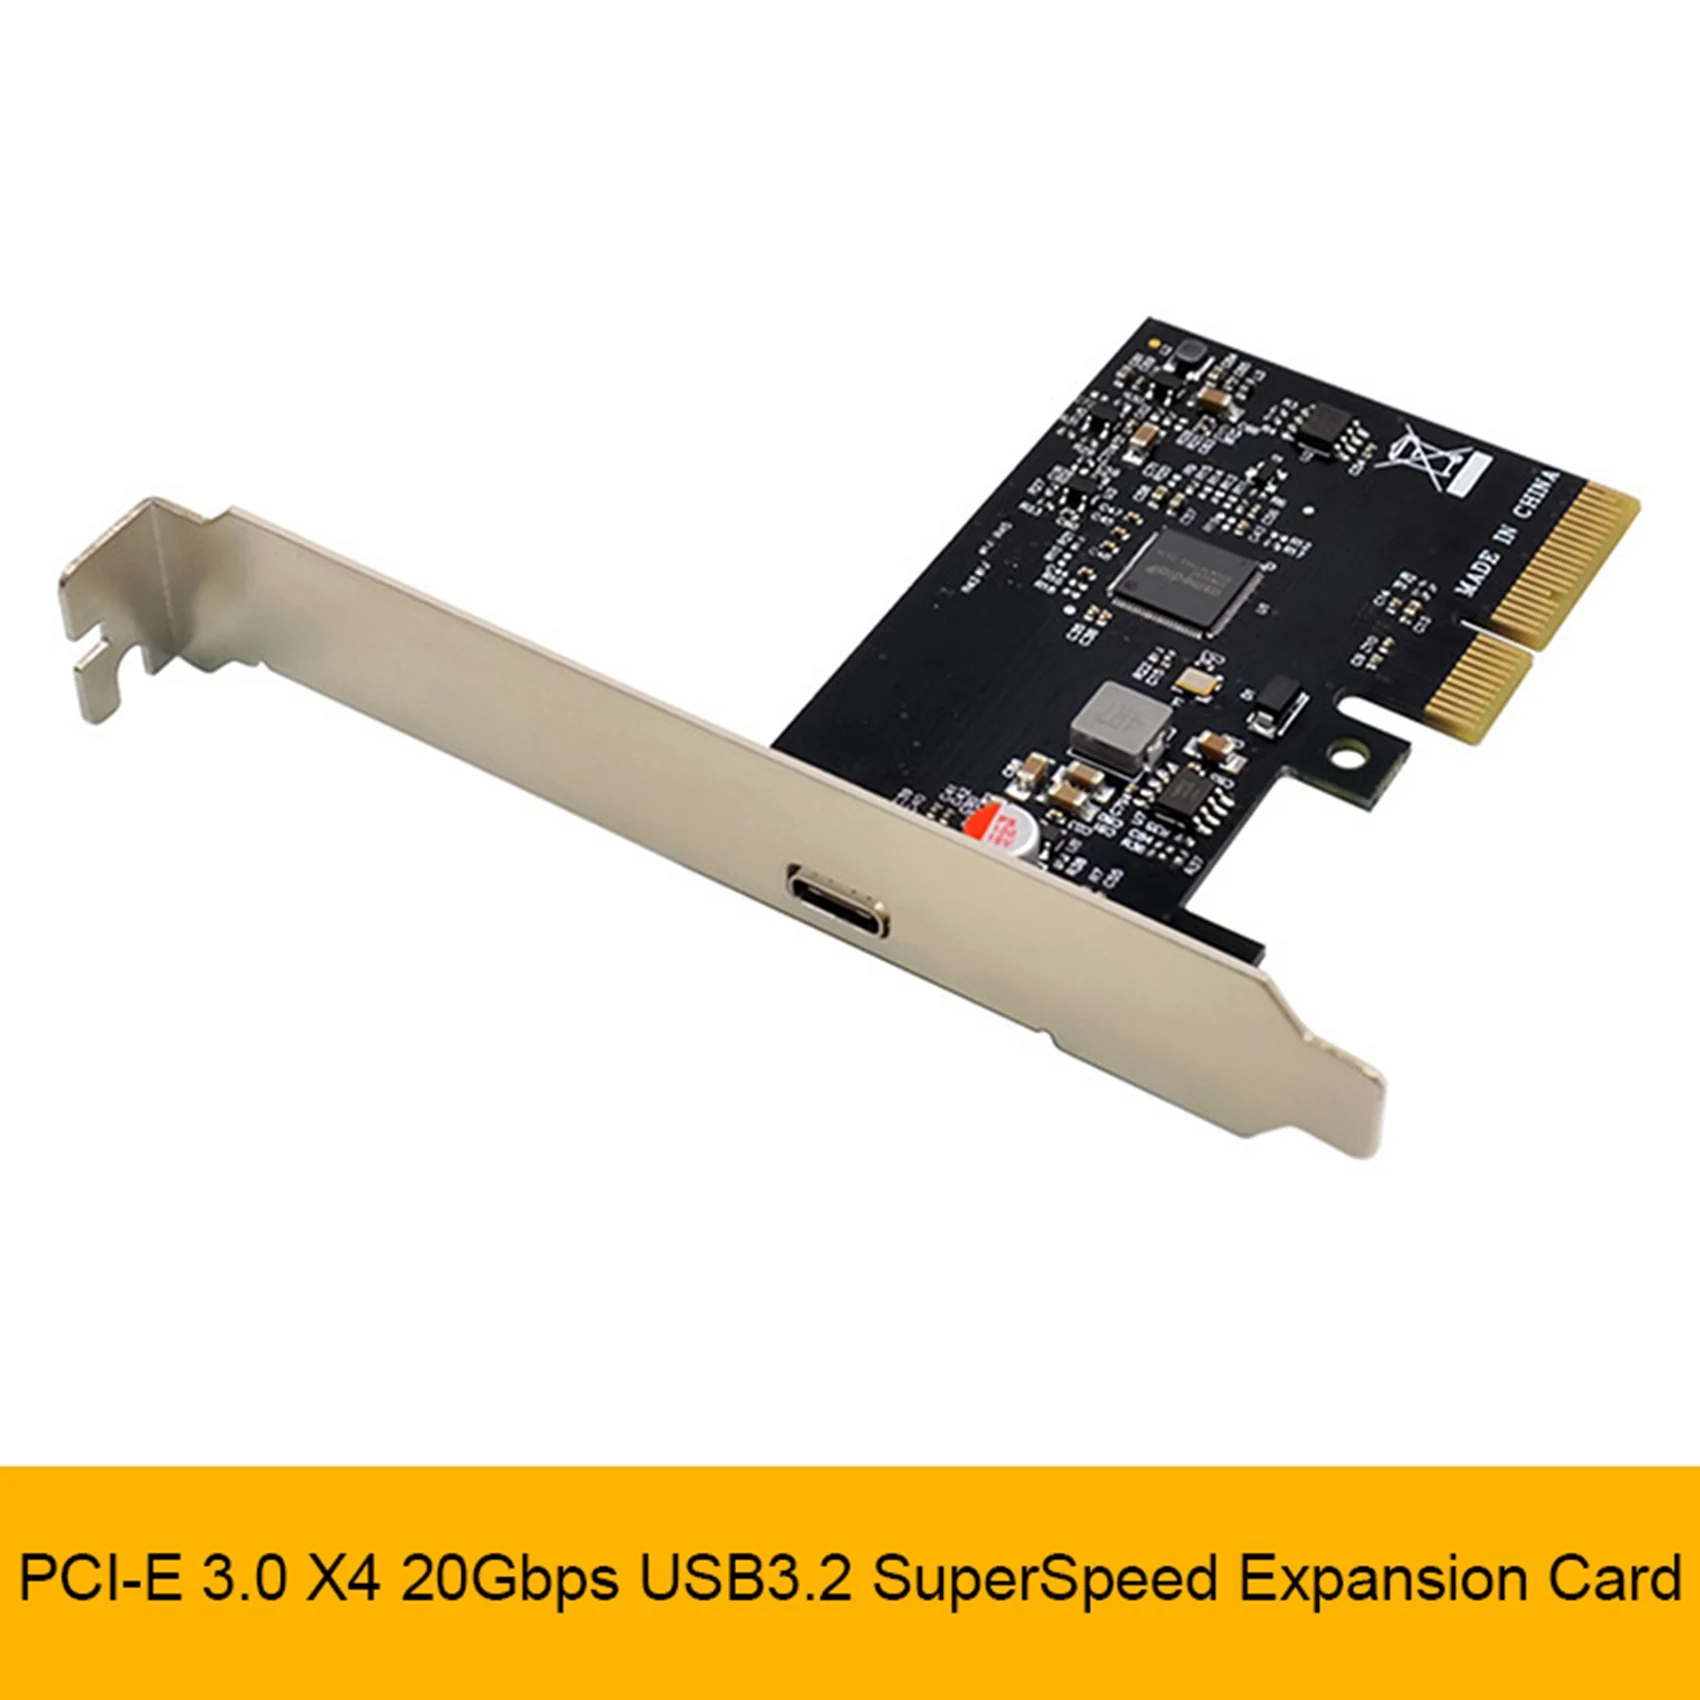 

PCI-E3.0 X4 USB3.2 Gen2X2 20Gbps Super Speed Industrial Conversion Expansion Card ASM3242 Chip Adapter Card